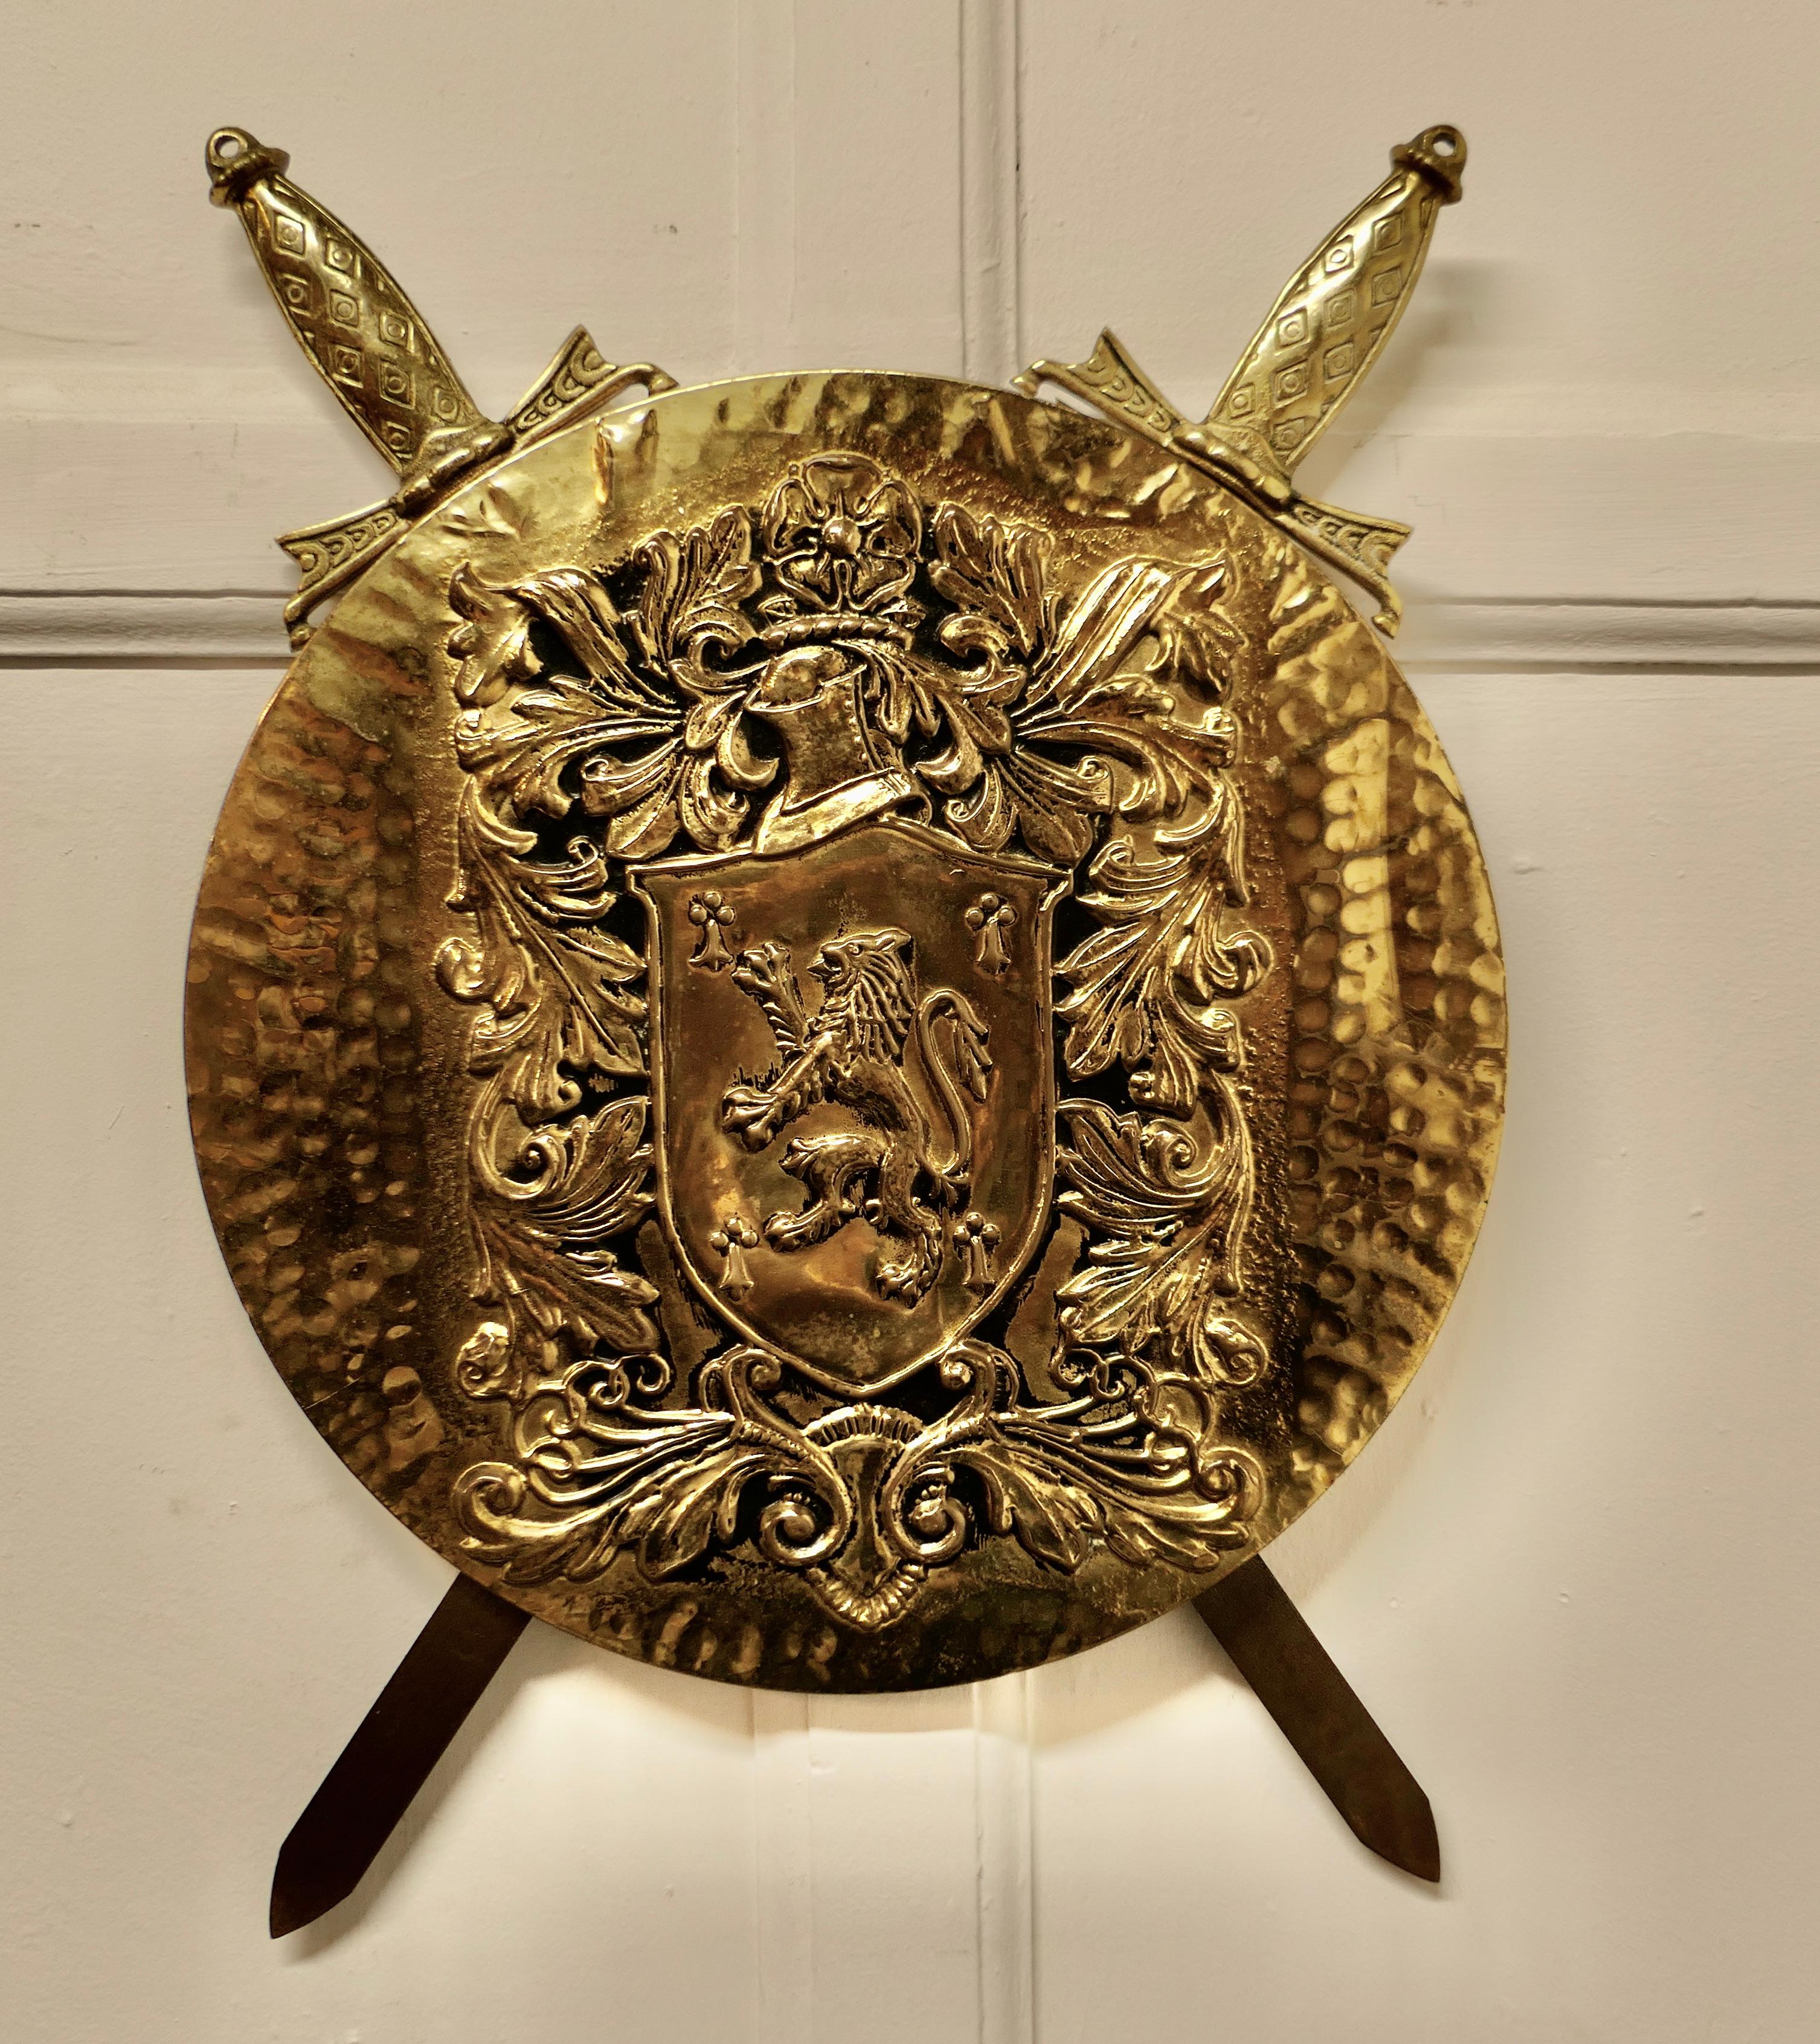 Wall hanging arts and crafts brass shield with cross swords 

A large decorative wall piece the shield is hand beaten and has a Lion Rampant 
The swords are held in the back but not removable, a good looking piece of Traditional Pub